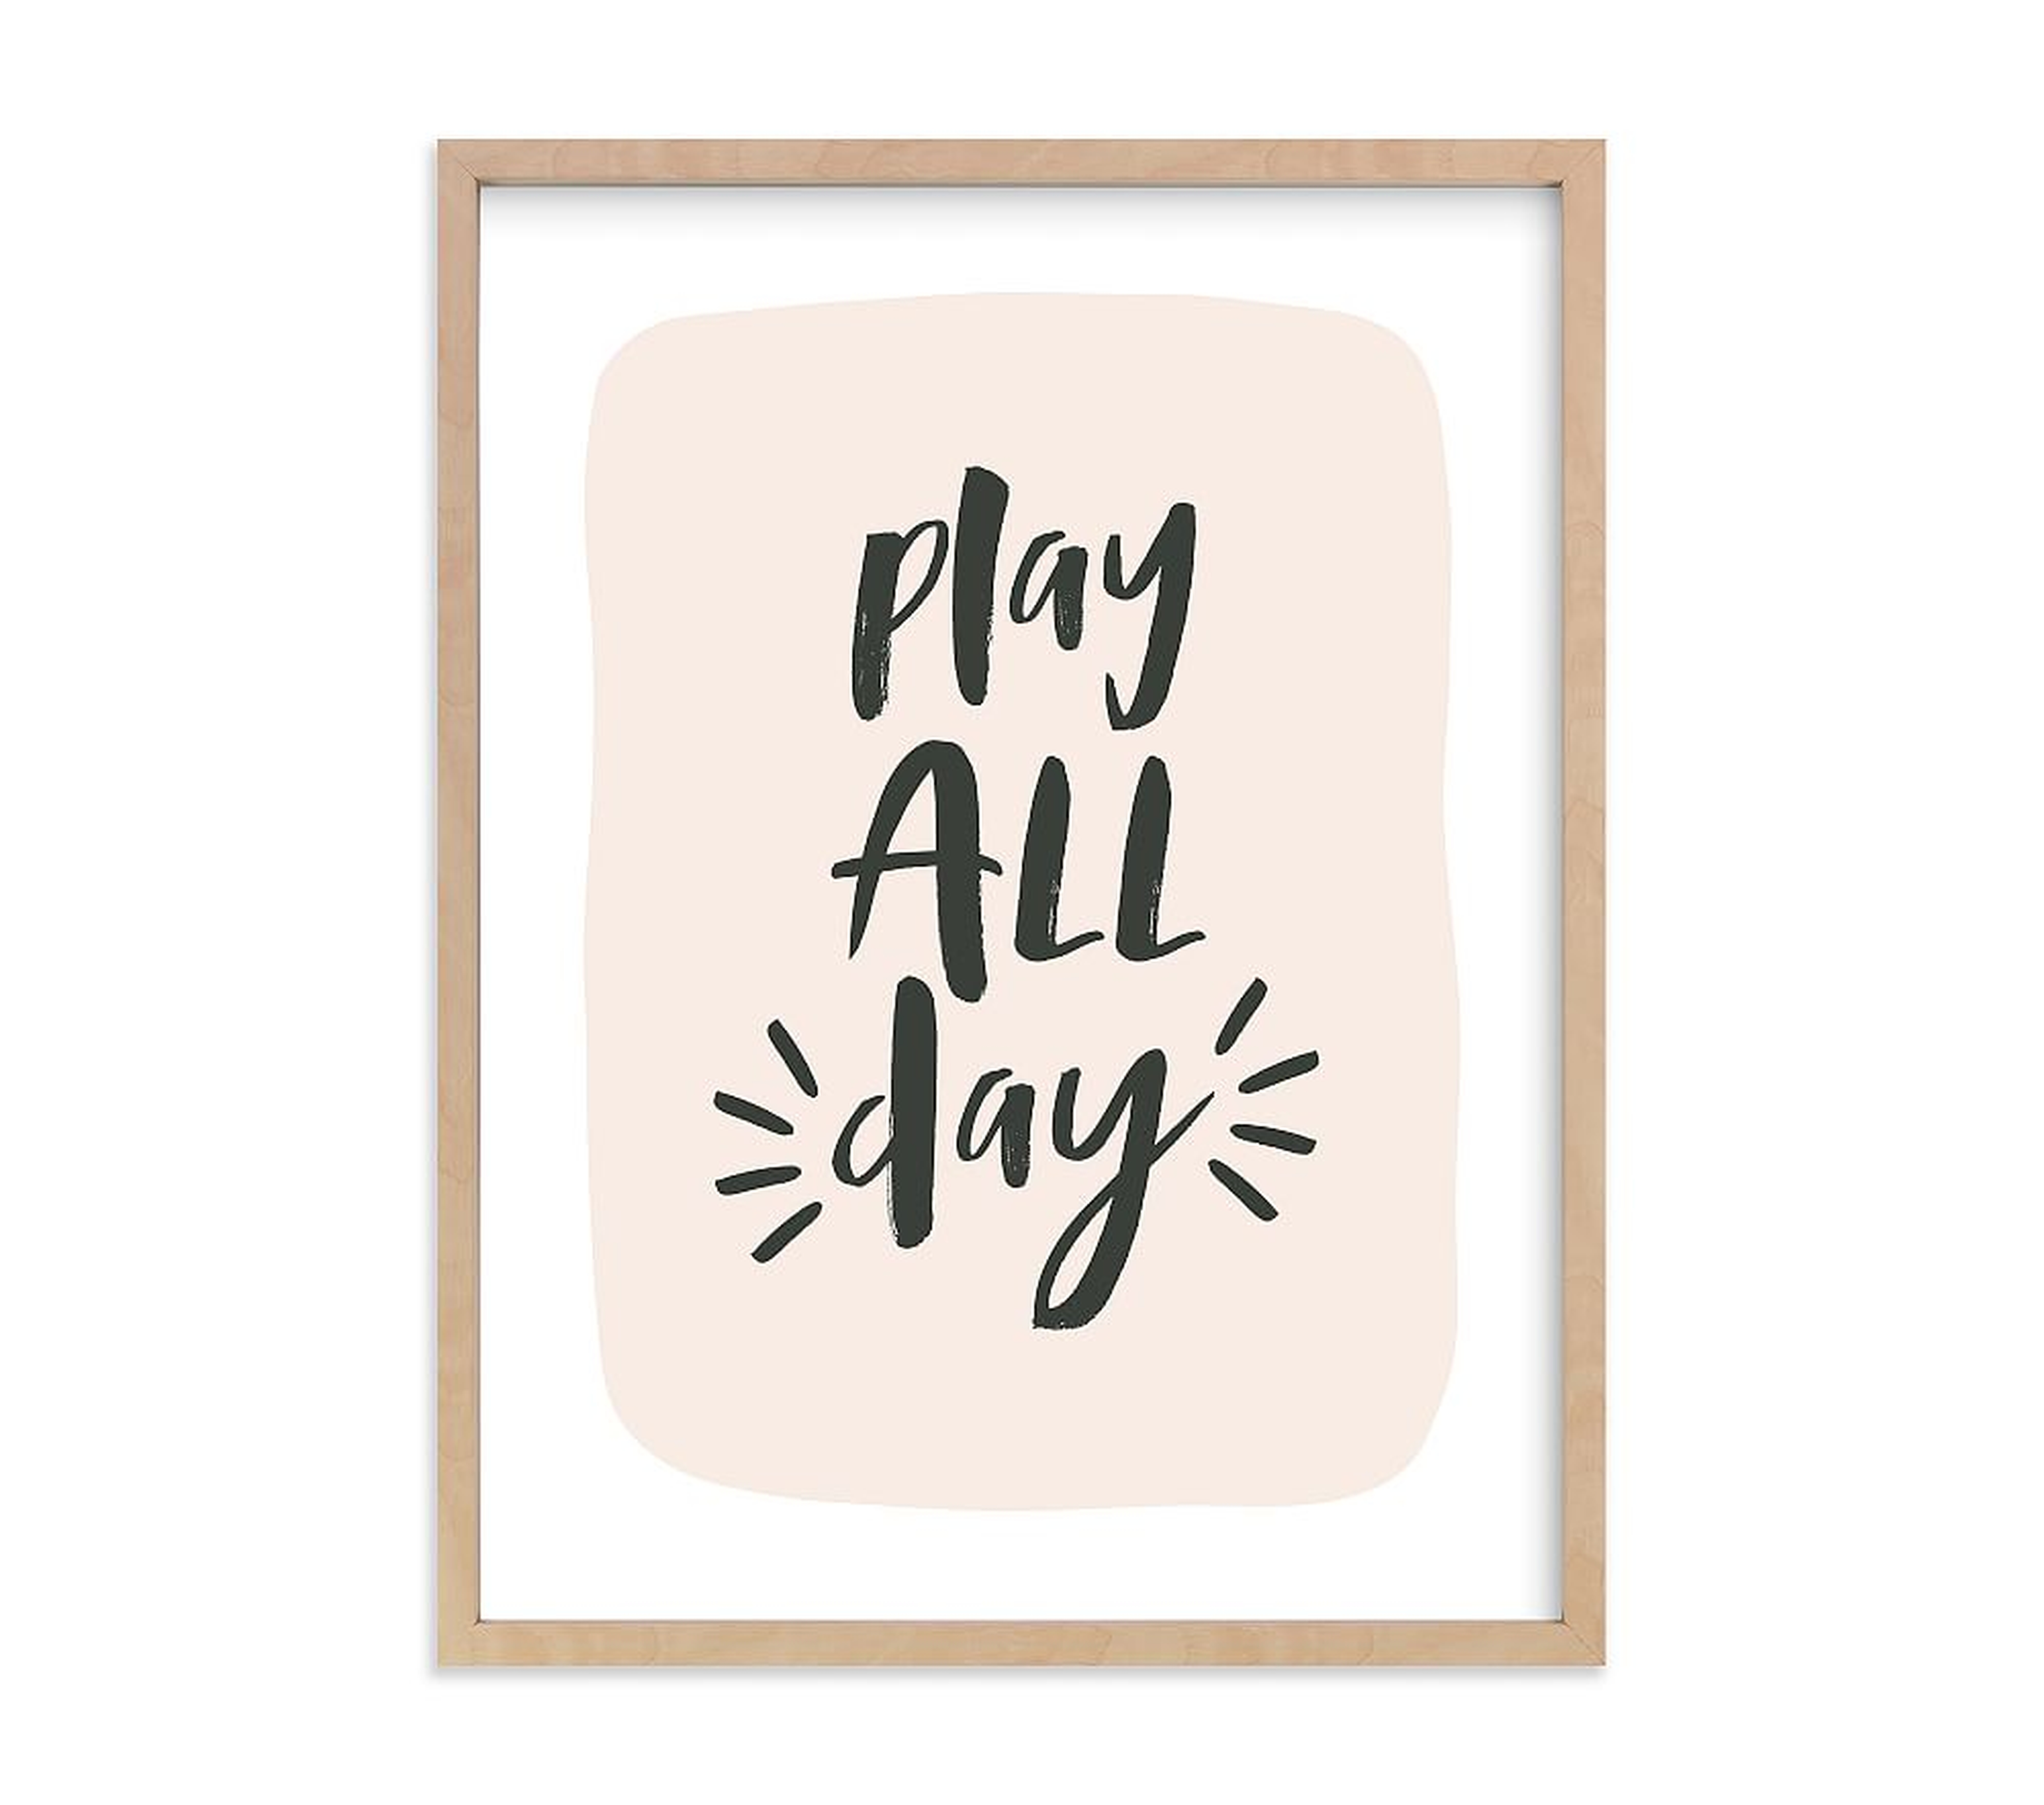 Minted(R) Night &amp; Day Play Wall Art by Erica Krystek, 18x24, Natural - Pottery Barn Kids